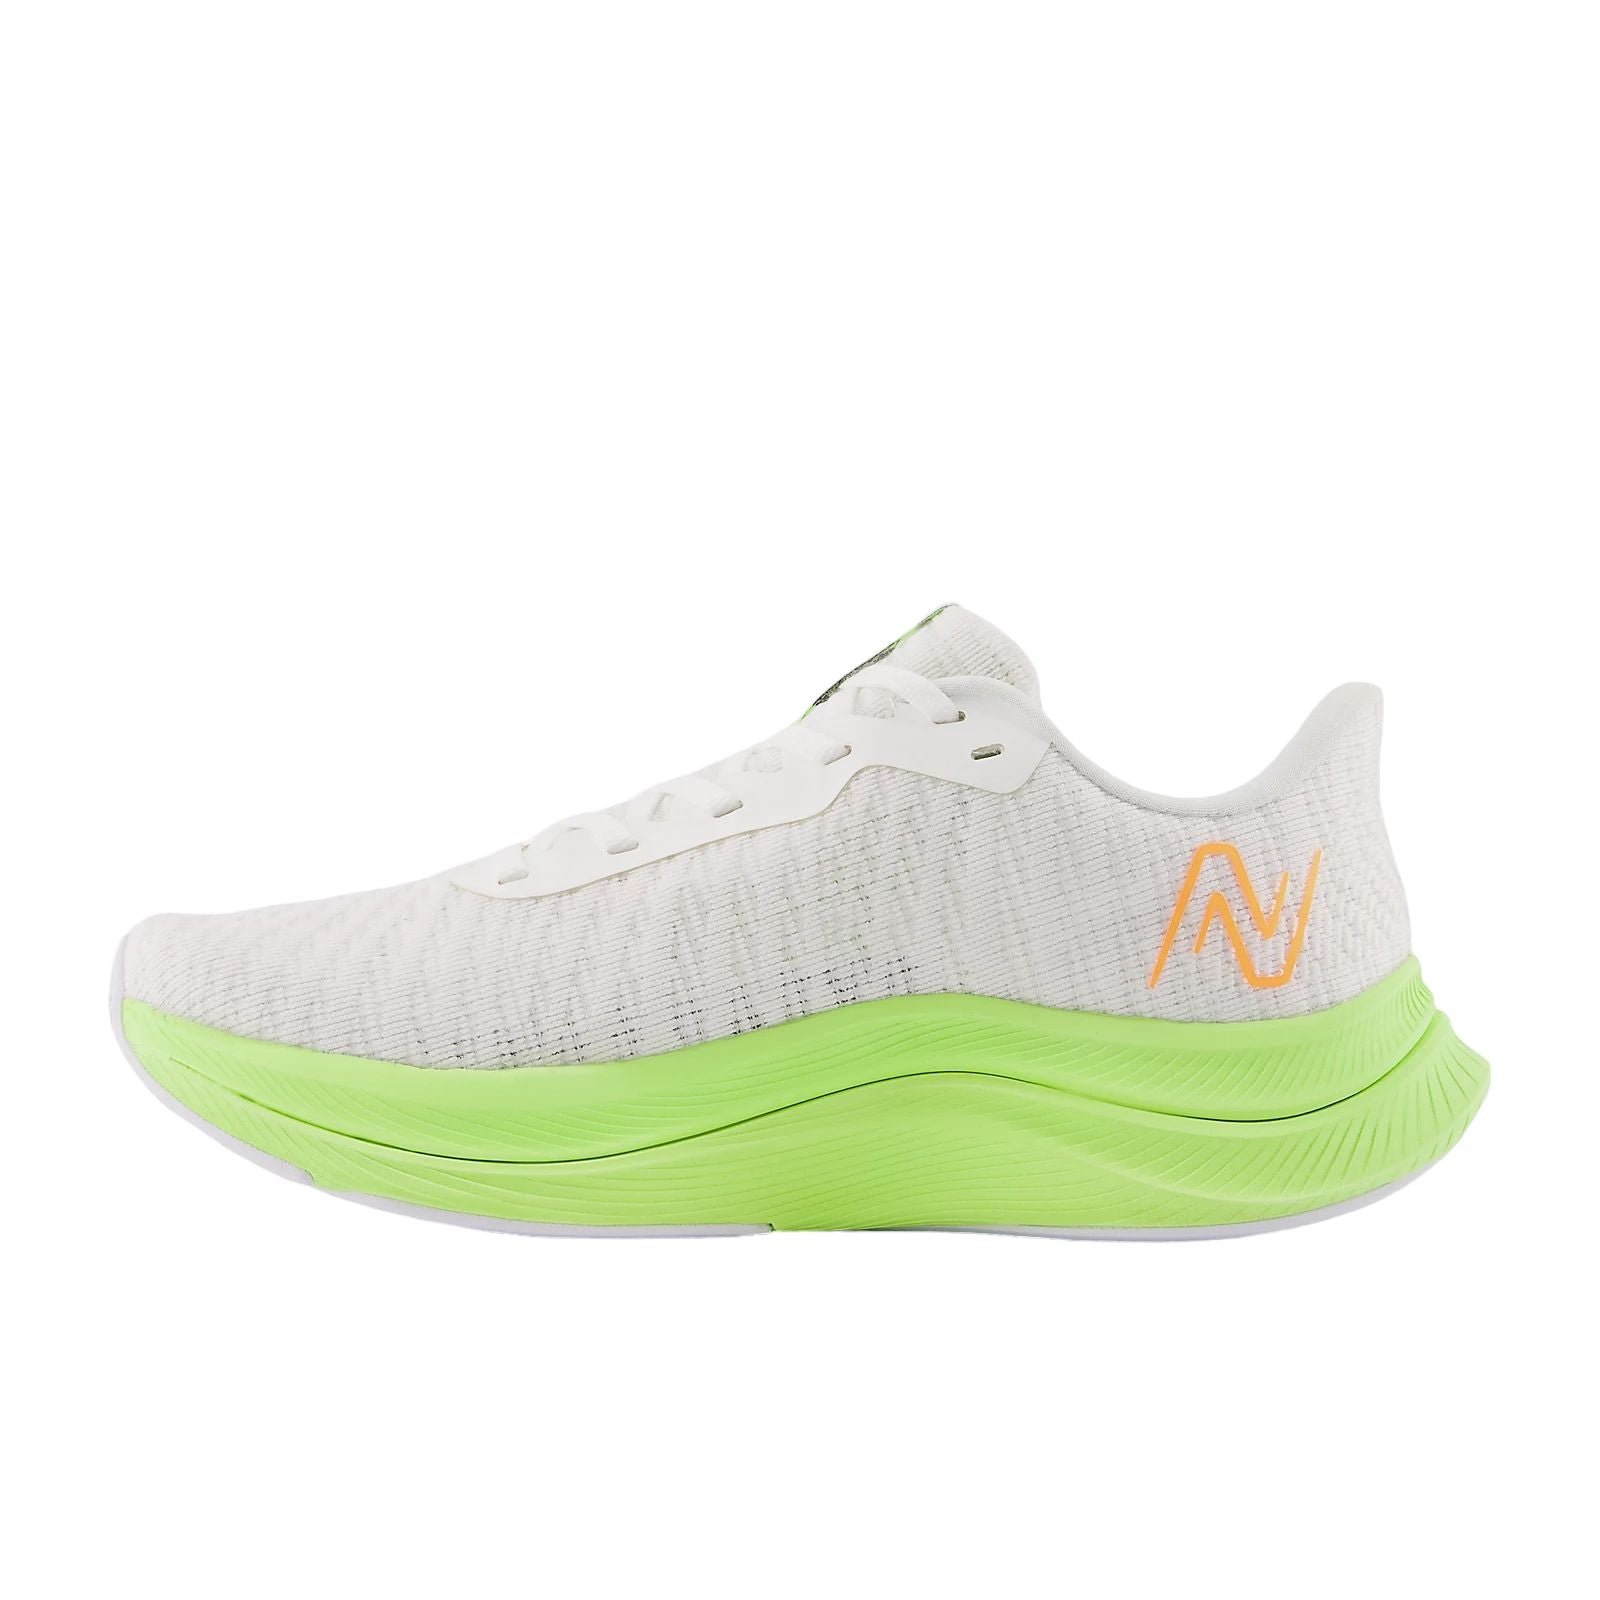 Women's FuelCell Propel v4 Shoes White/Bleached Lime/Graphite 